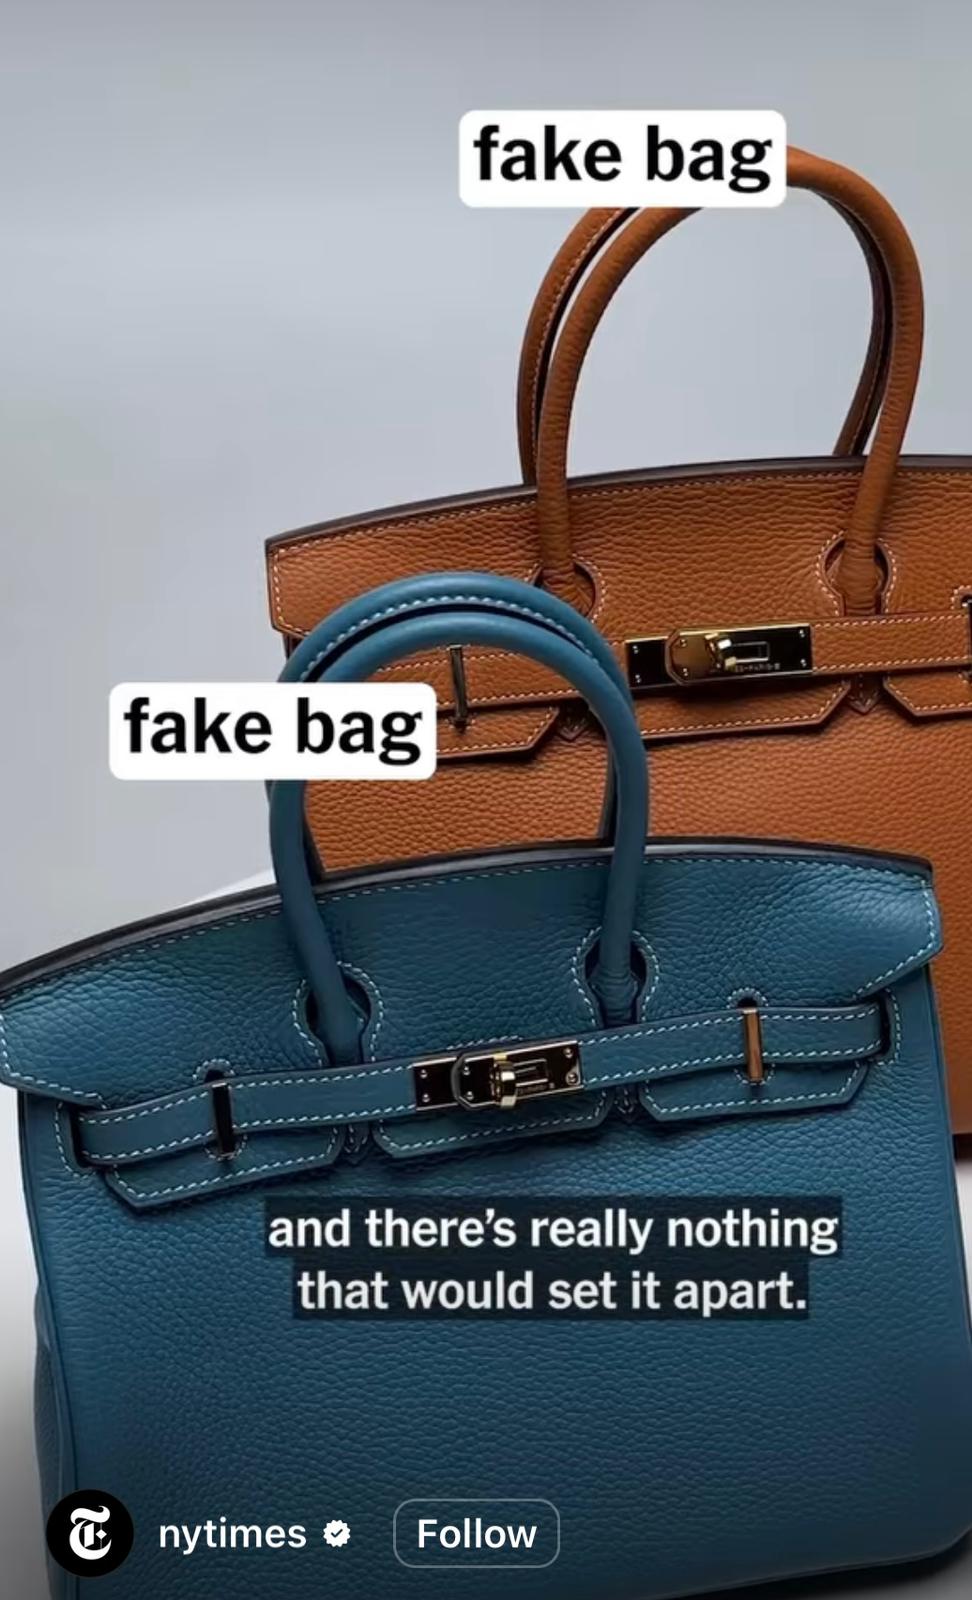 Knockoff luxury items no longer taboo as Gen Z shoppers embrace 'superfake'  designer bags, shoes